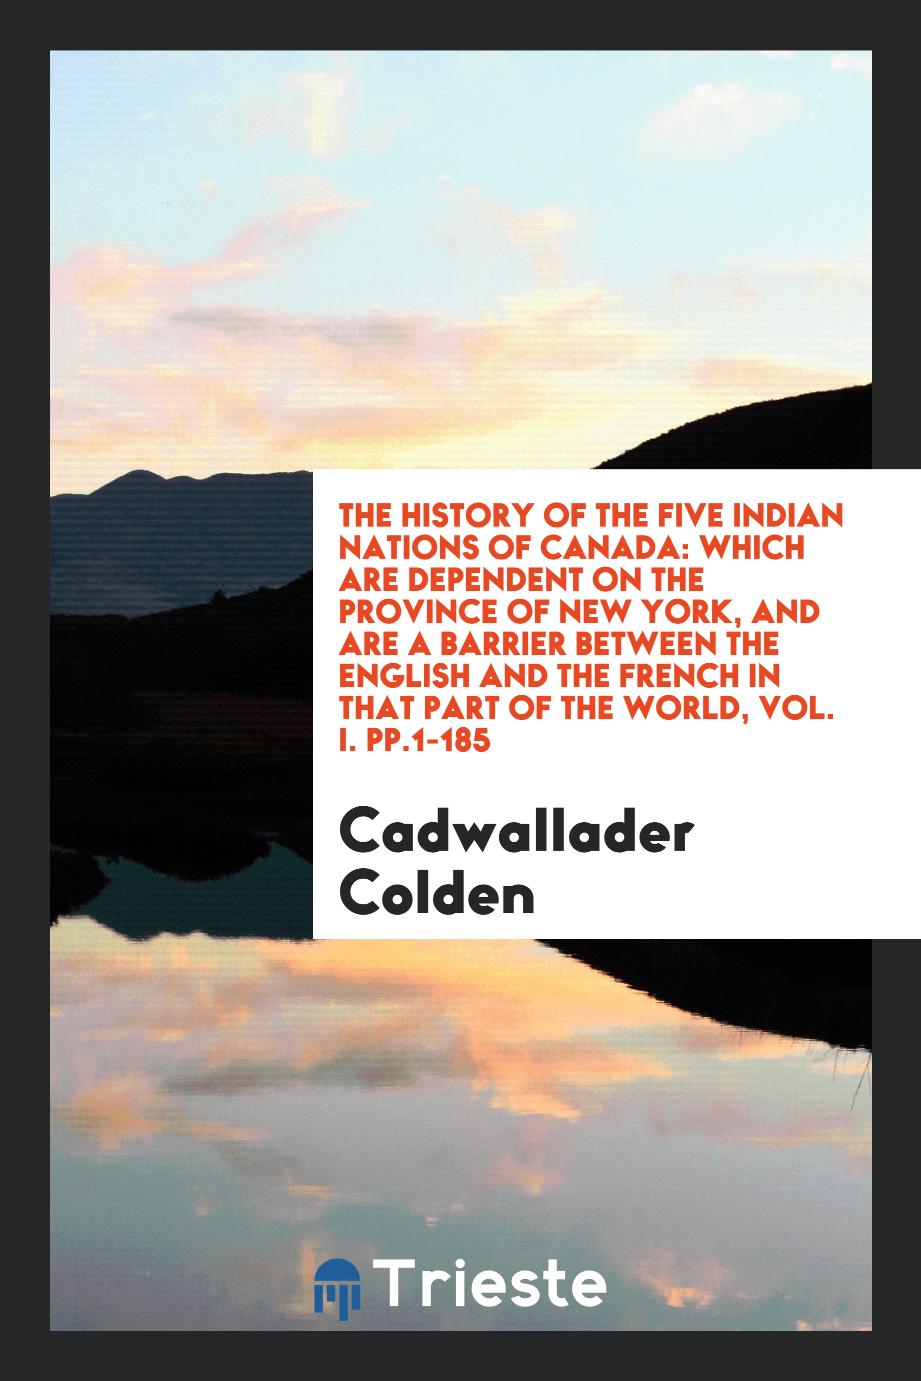 The history of the five Indian nations of Canada: which are dependent on the Province of New York, and are a barrier between the English and the French in that part of the world, Vol. I. pp.1-185